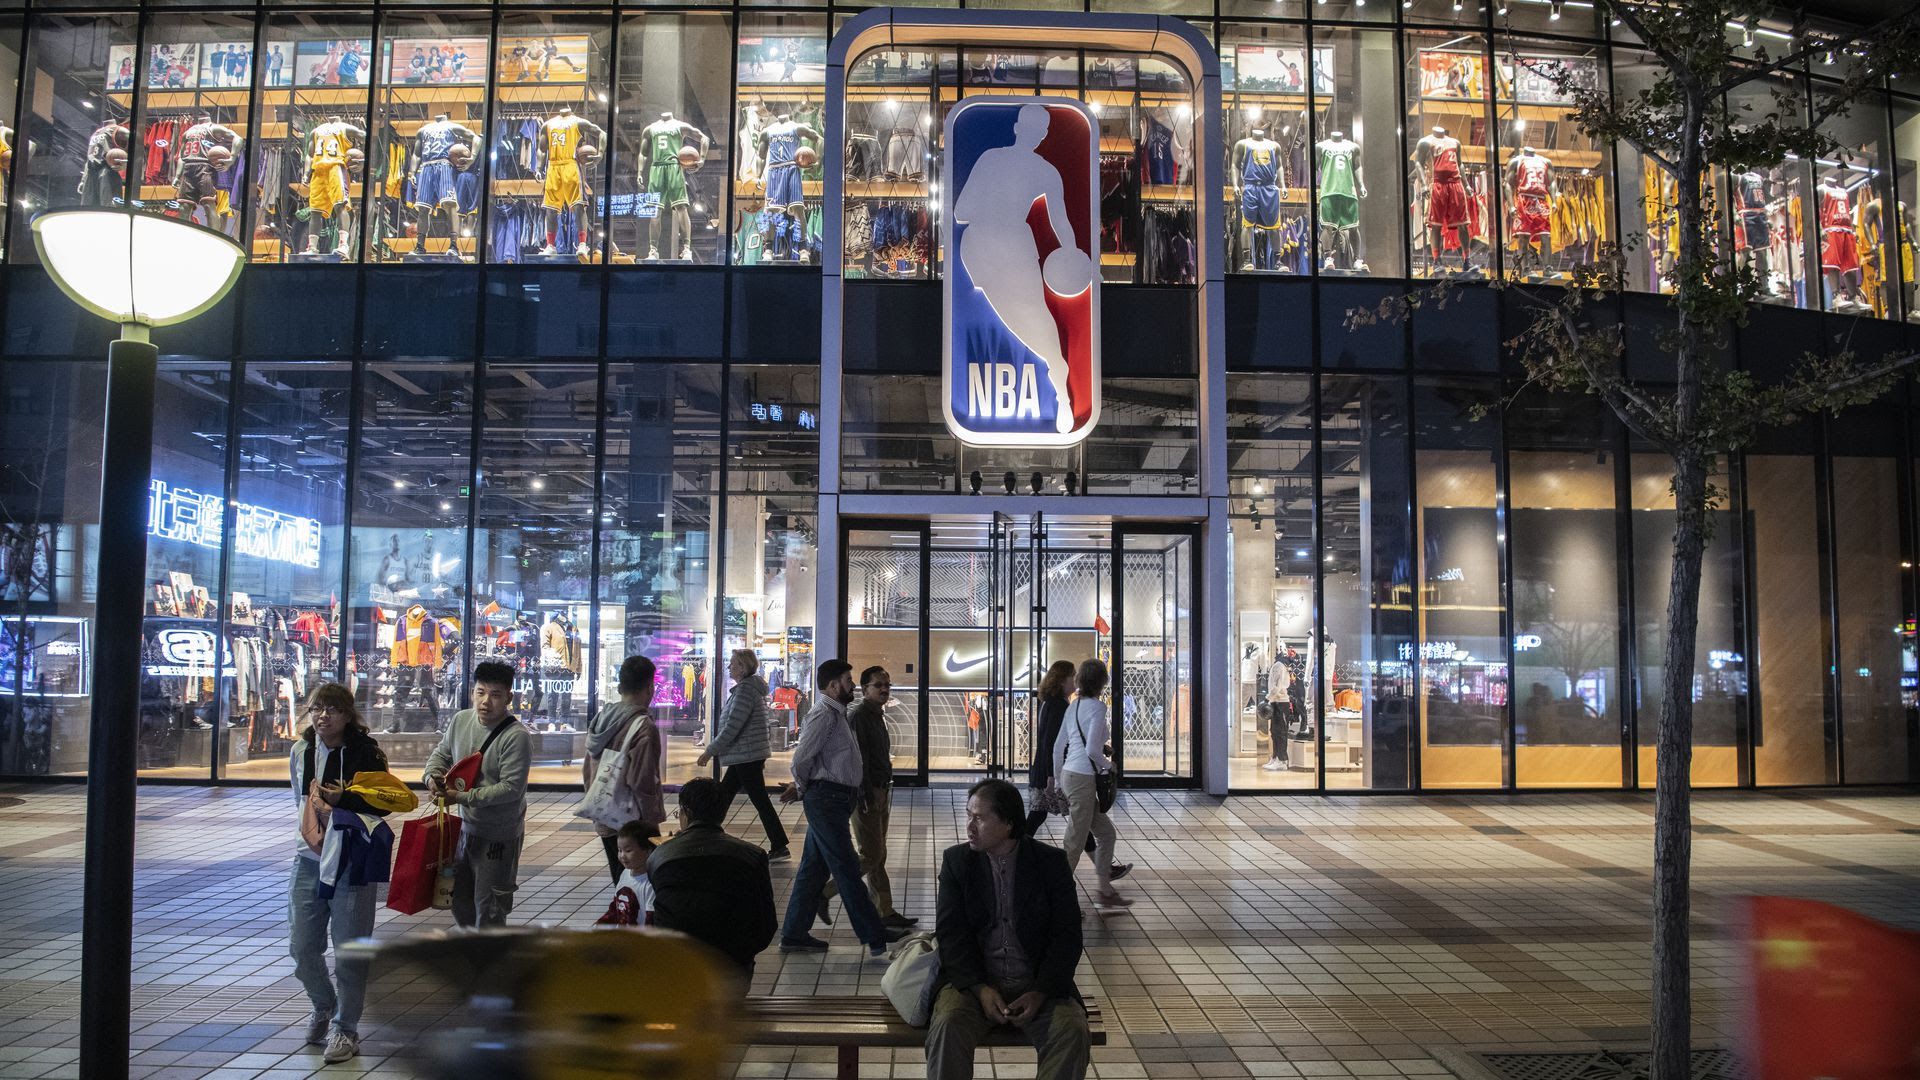 NBA store in China